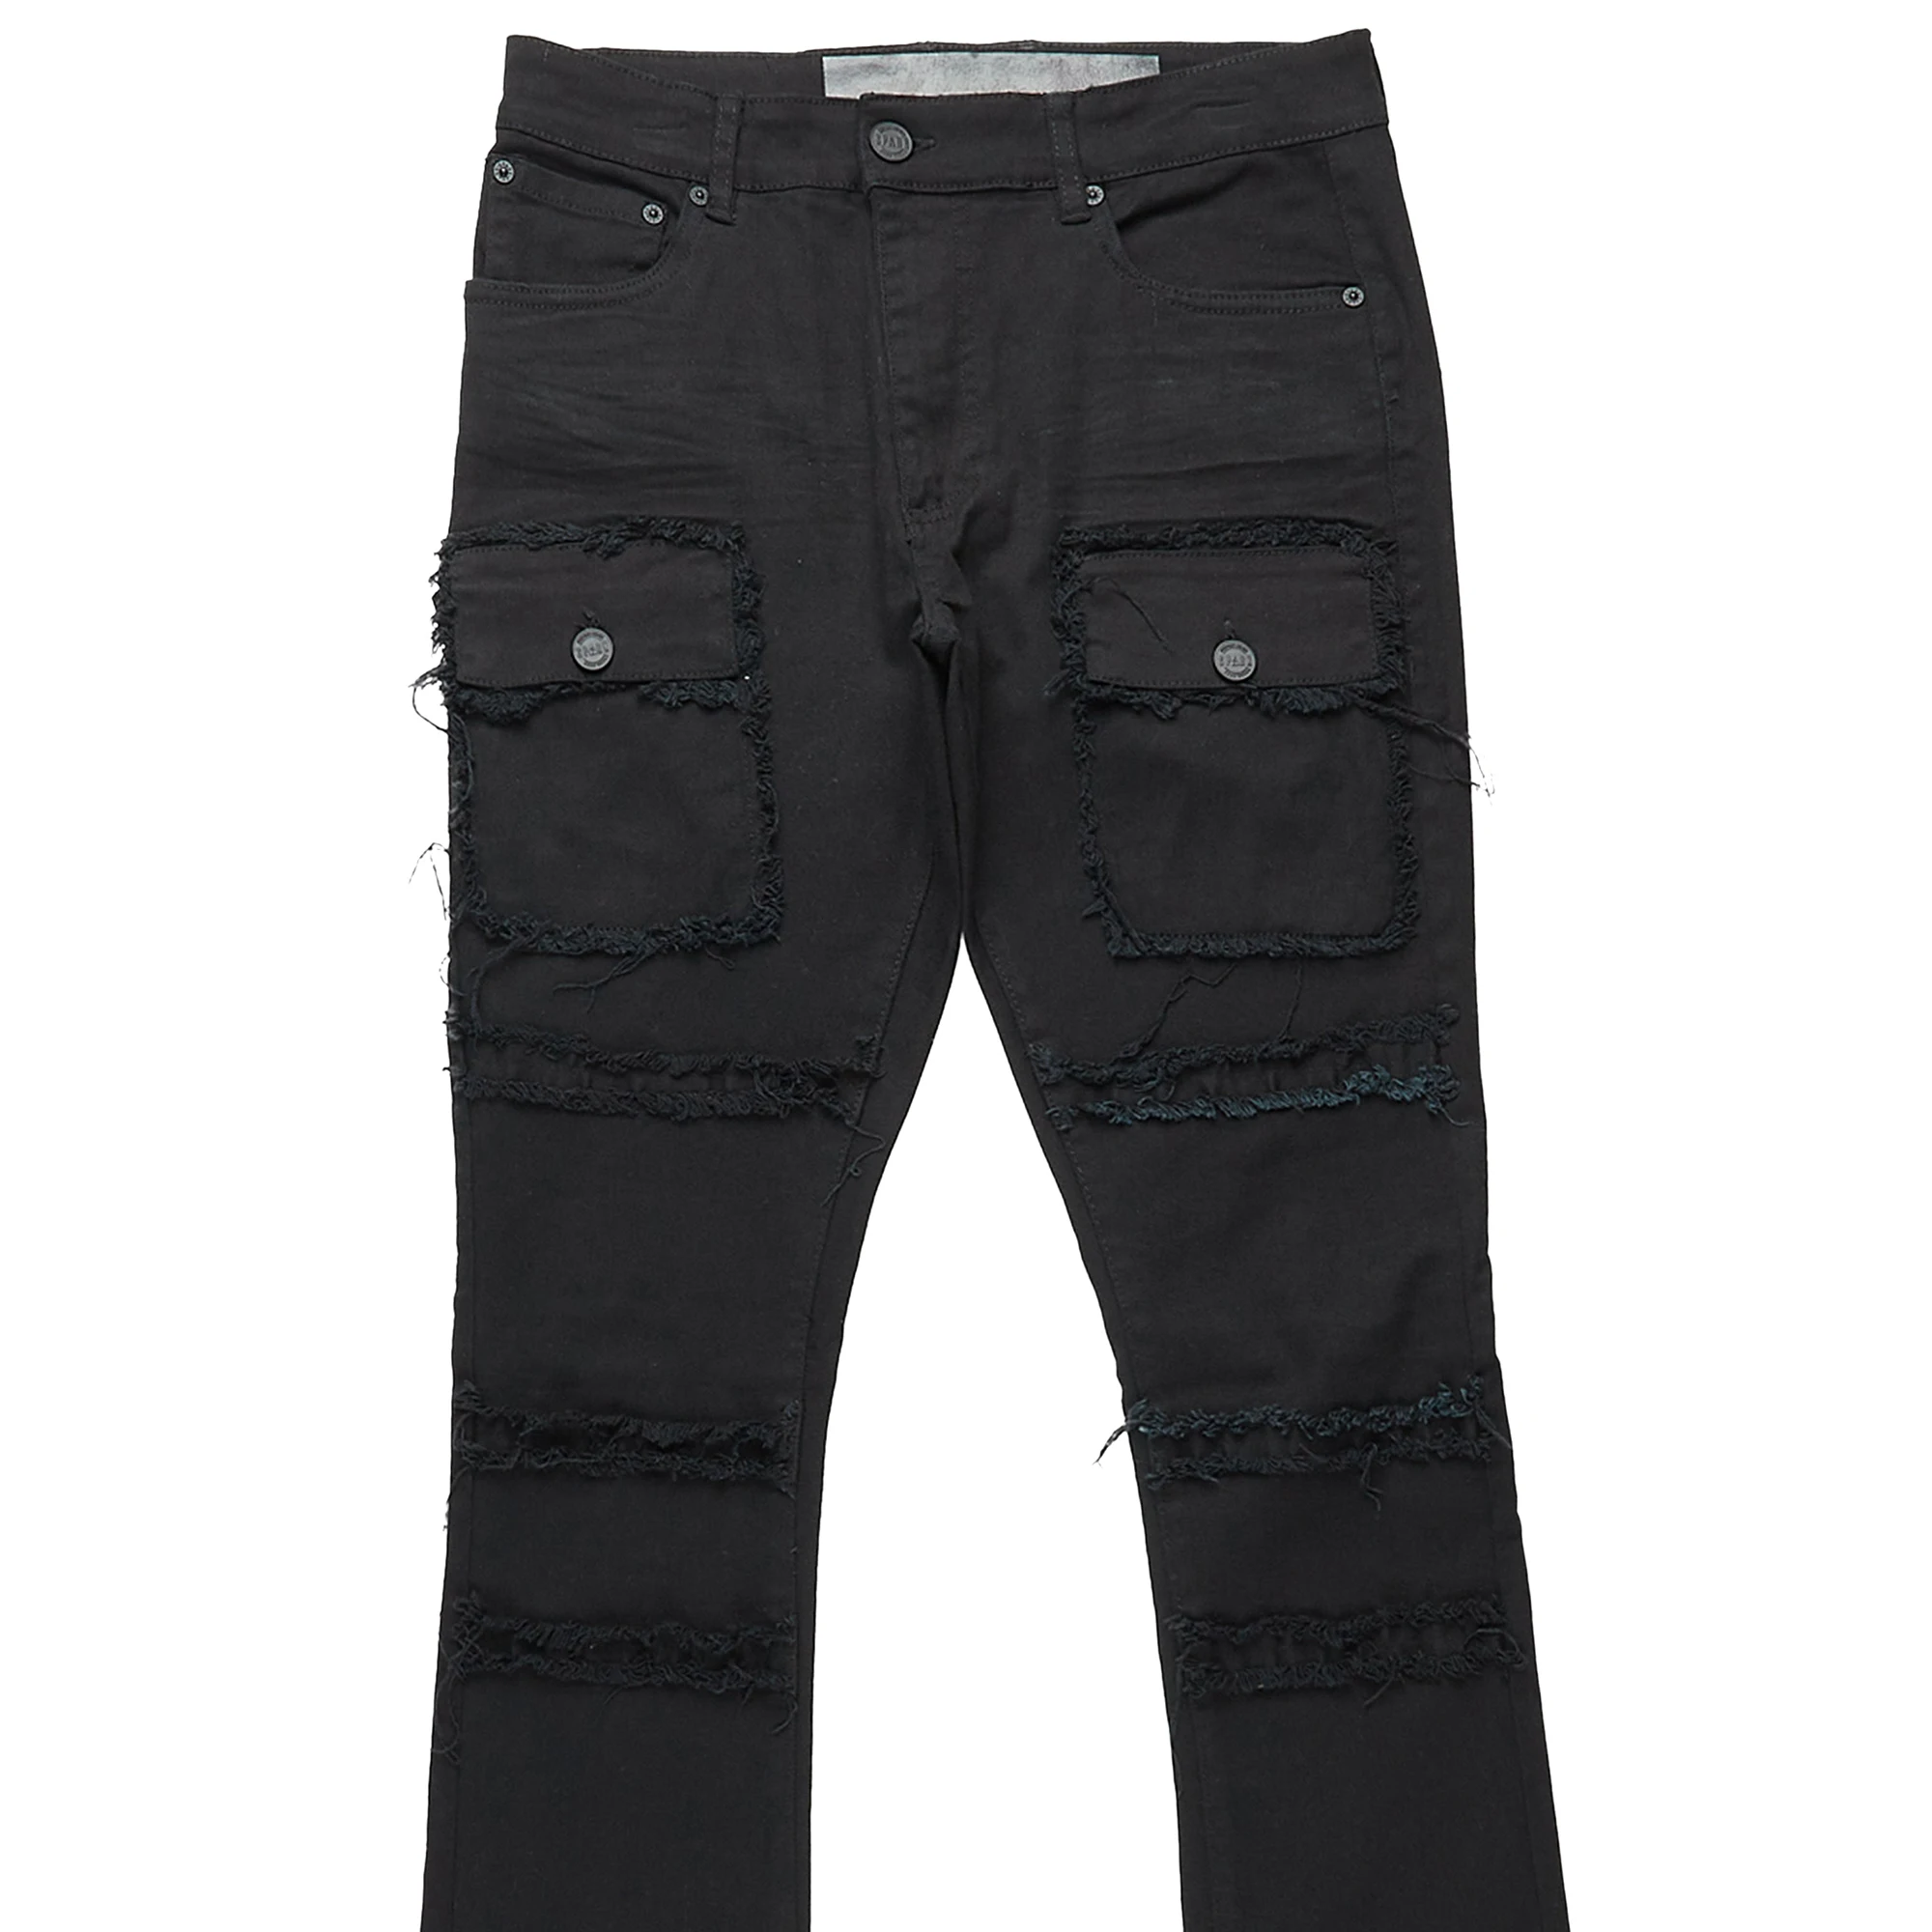 Custom Stacked Jeans Manufacturers Black Work Jeans For Men Stacked ...